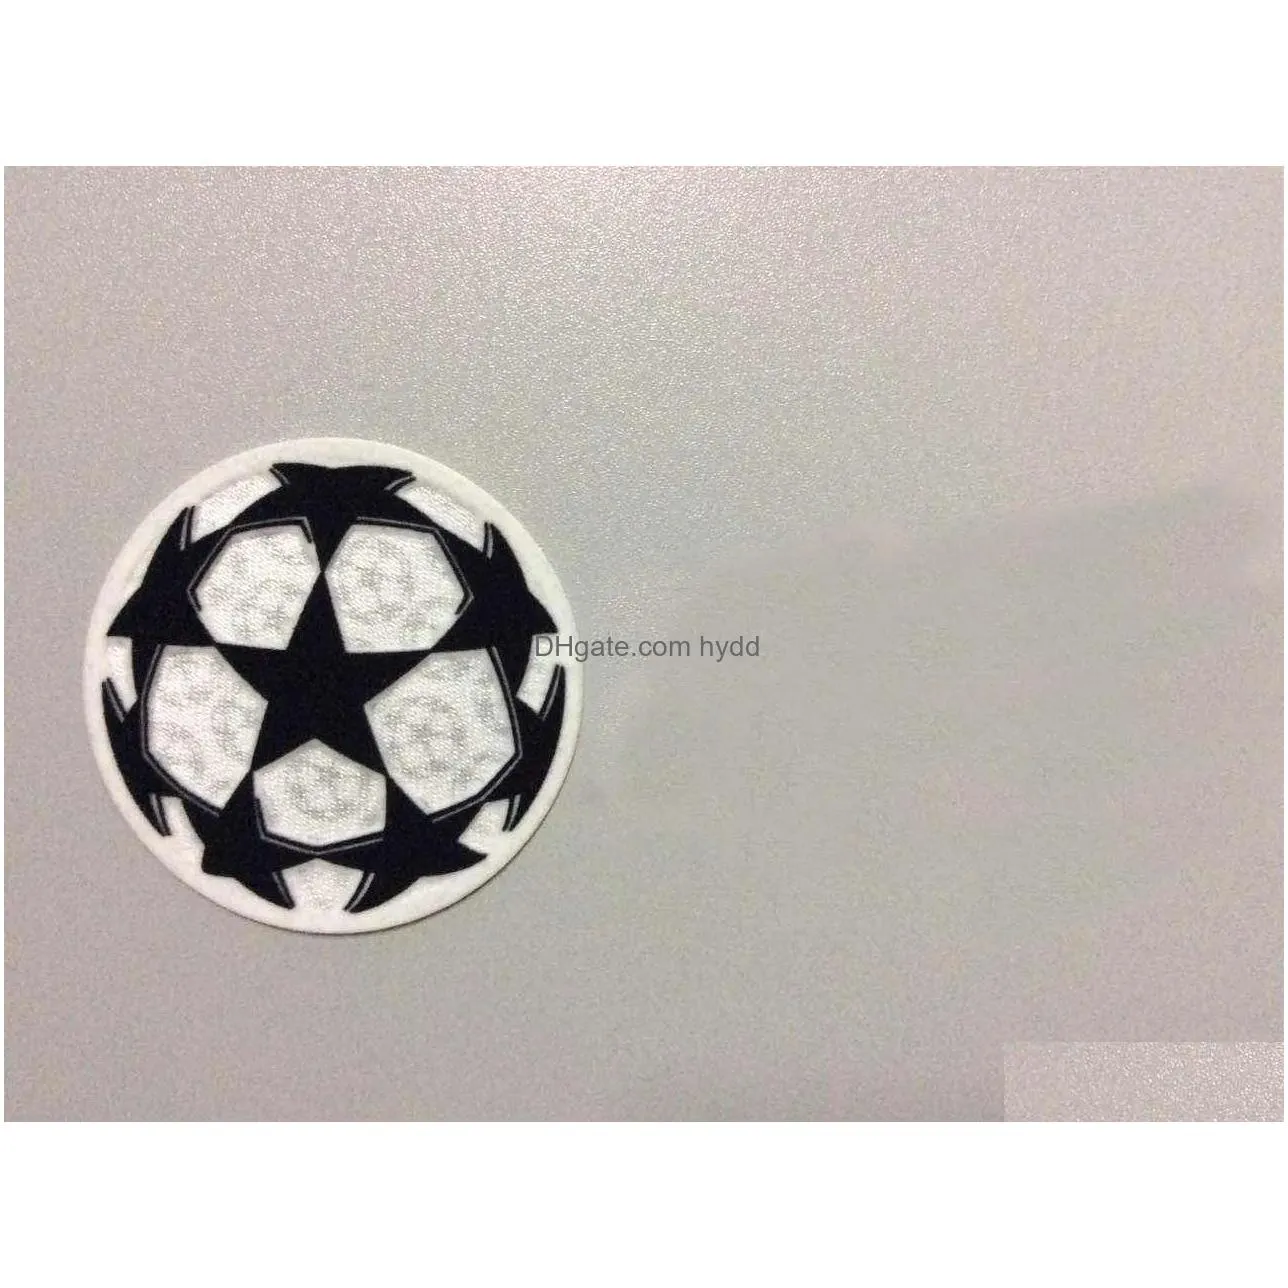  champions ball add respect football printes badges soccer stamping pattern